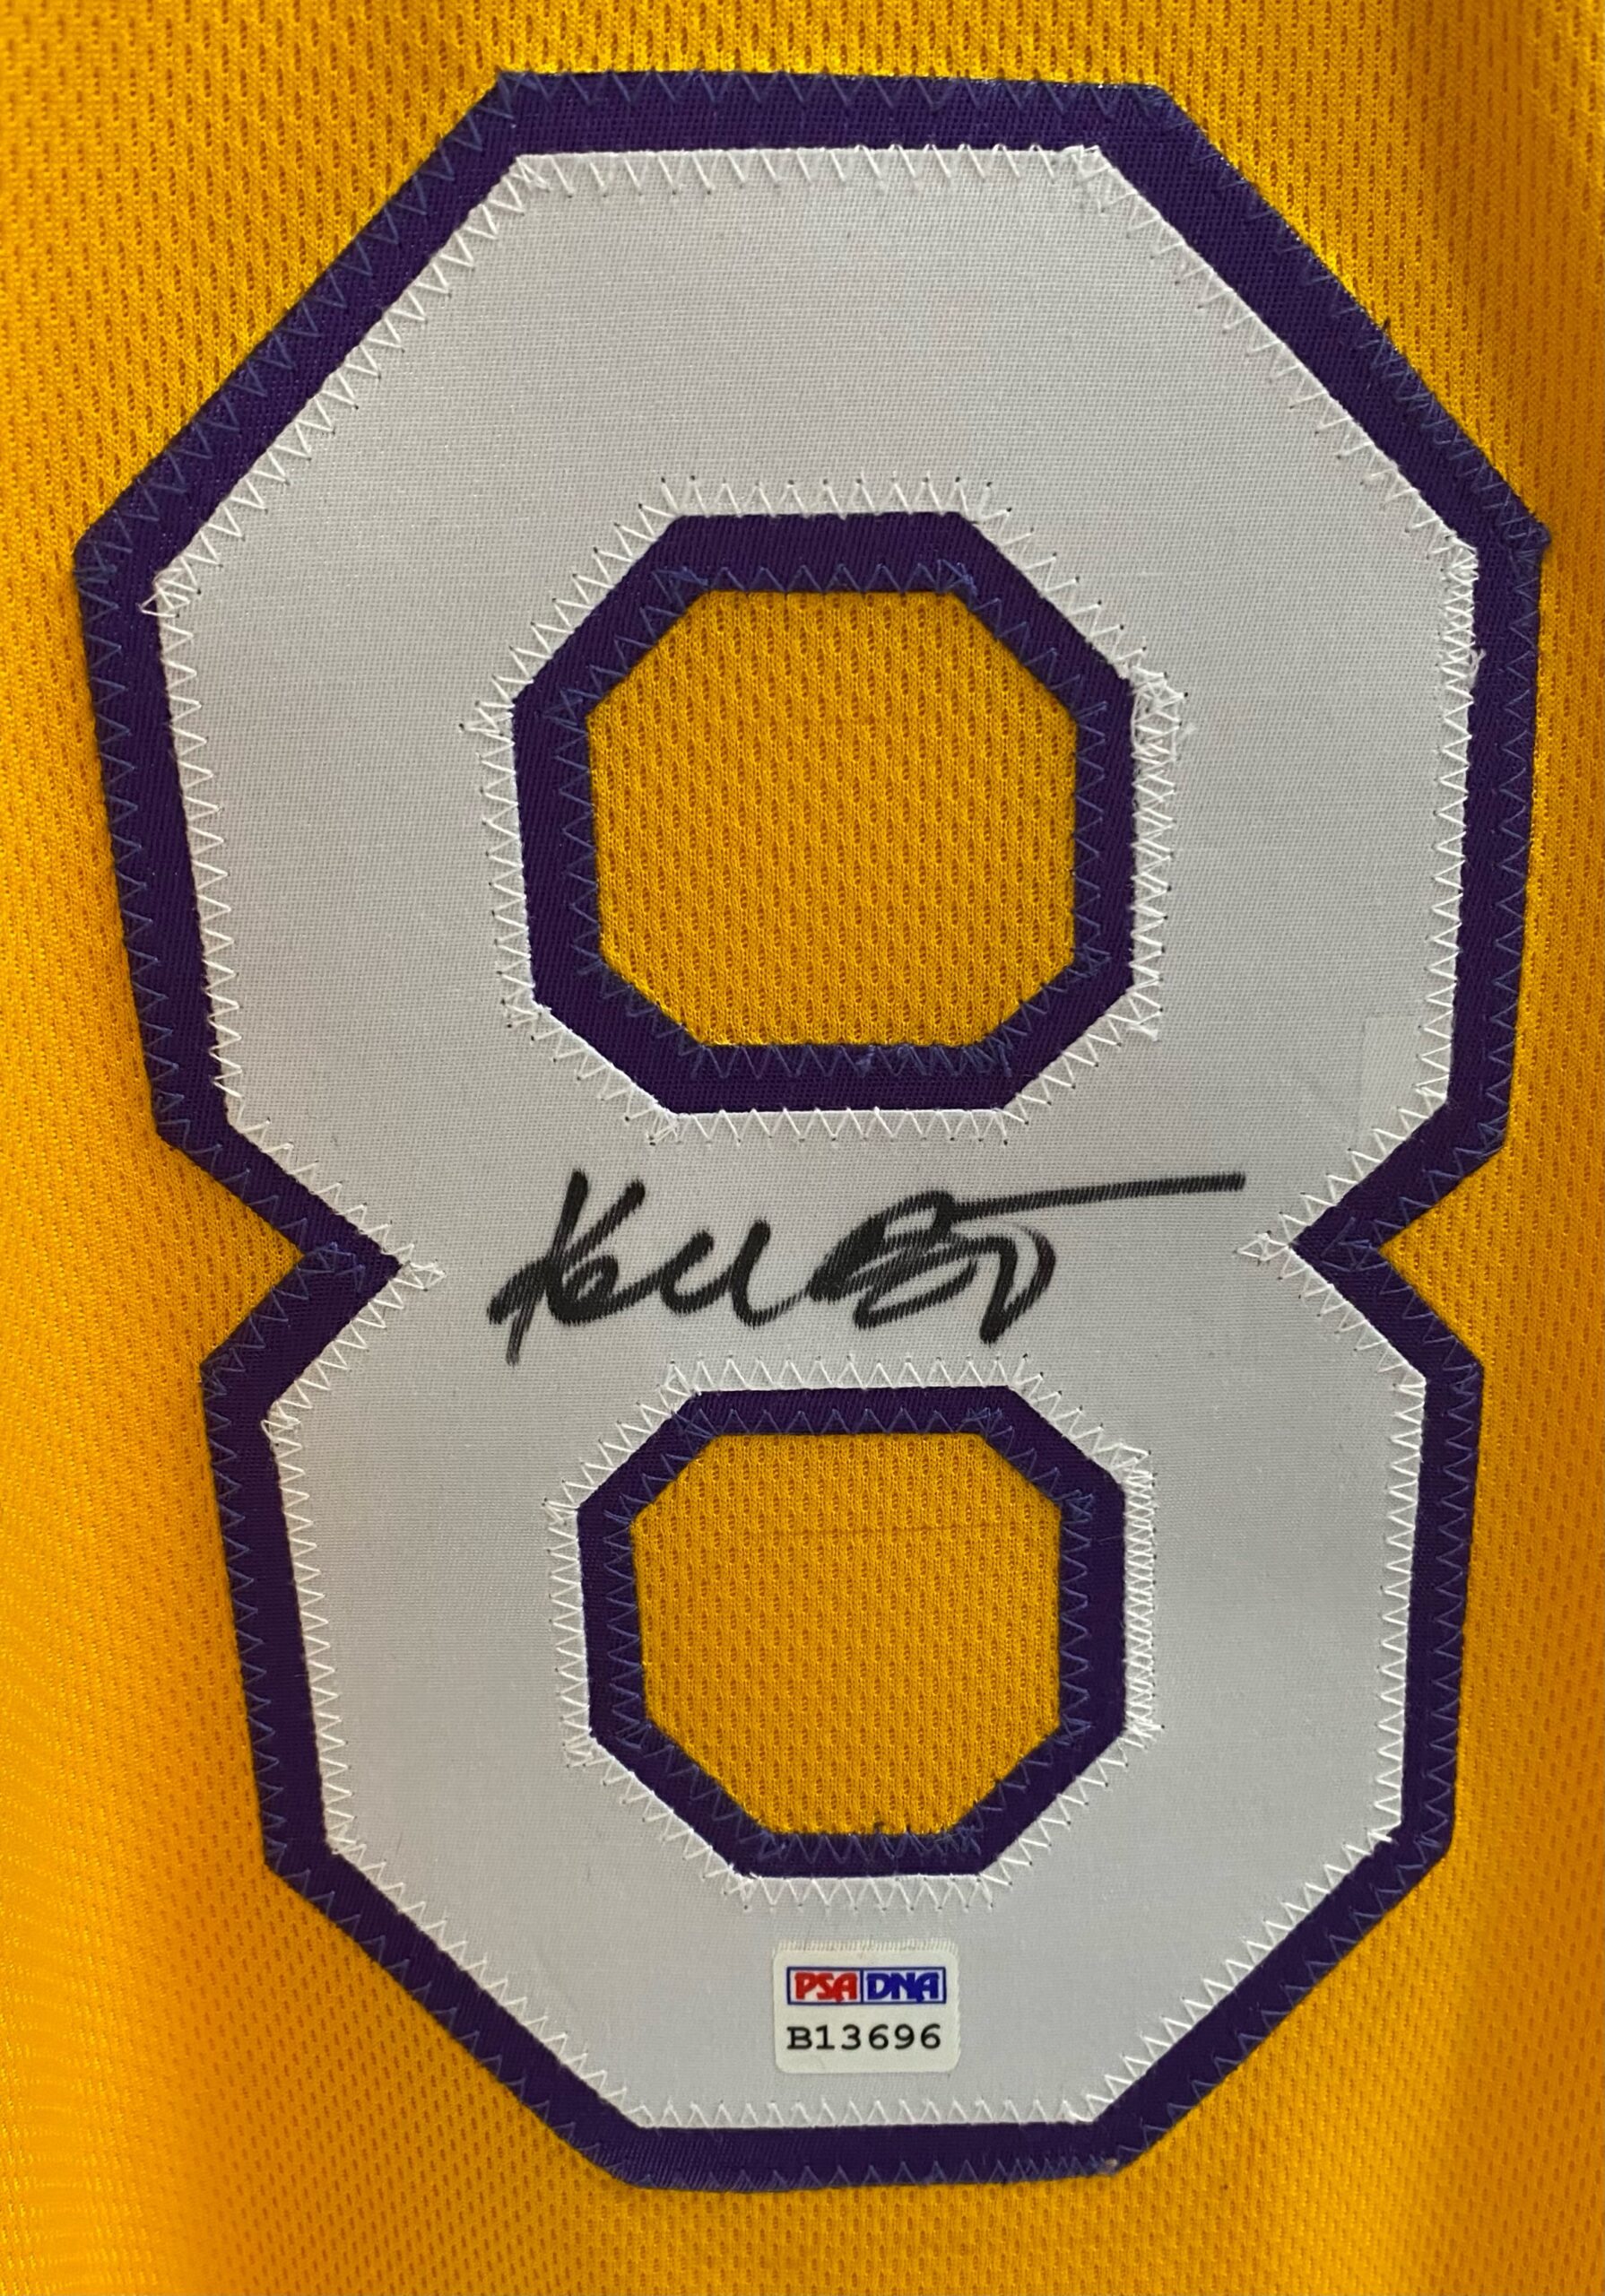 Kobe Bryant Autographed Los Angeles (Yellow #8) Deluxe Framed Jersey -  PSADNA, Beckett Letter